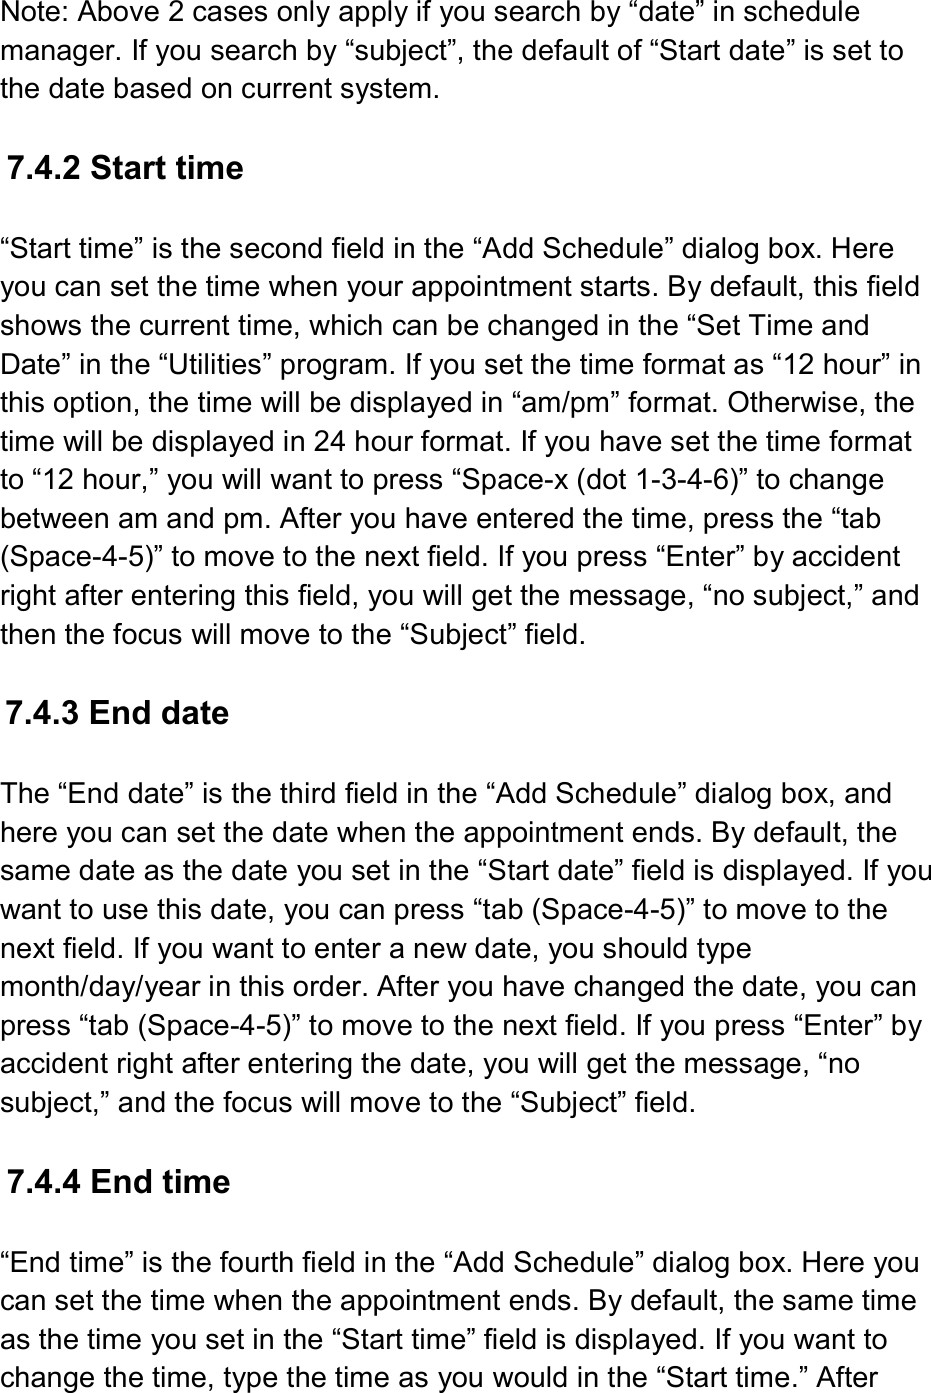  Note: Above 2 cases only apply if you search by “date” in schedule manager. If you search by “subject”, the default of “Start date” is set to the date based on current system.  7.4.2 Start time  “Start time” is the second field in the “Add Schedule” dialog box. Here you can set the time when your appointment starts. By default, this field shows the current time, which can be changed in the “Set Time and Date” in the “Utilities” program. If you set the time format as “12 hour” in this option, the time will be displayed in “am/pm” format. Otherwise, the time will be displayed in 24 hour format. If you have set the time format to “12 hour,” you will want to press “Space-x (dot 1-3-4-6)” to change between am and pm. After you have entered the time, press the “tab (Space-4-5)” to move to the next field. If you press “Enter” by accident right after entering this field, you will get the message, “no subject,” and then the focus will move to the “Subject” field.  7.4.3 End date  The “End date” is the third field in the “Add Schedule” dialog box, and here you can set the date when the appointment ends. By default, the same date as the date you set in the “Start date” field is displayed. If you want to use this date, you can press “tab (Space-4-5)” to move to the next field. If you want to enter a new date, you should type month/day/year in this order. After you have changed the date, you can press “tab (Space-4-5)” to move to the next field. If you press “Enter” by accident right after entering the date, you will get the message, “no subject,” and the focus will move to the “Subject” field.  7.4.4 End time  “End time” is the fourth field in the “Add Schedule” dialog box. Here you can set the time when the appointment ends. By default, the same time as the time you set in the “Start time” field is displayed. If you want to change the time, type the time as you would in the “Start time.” After 